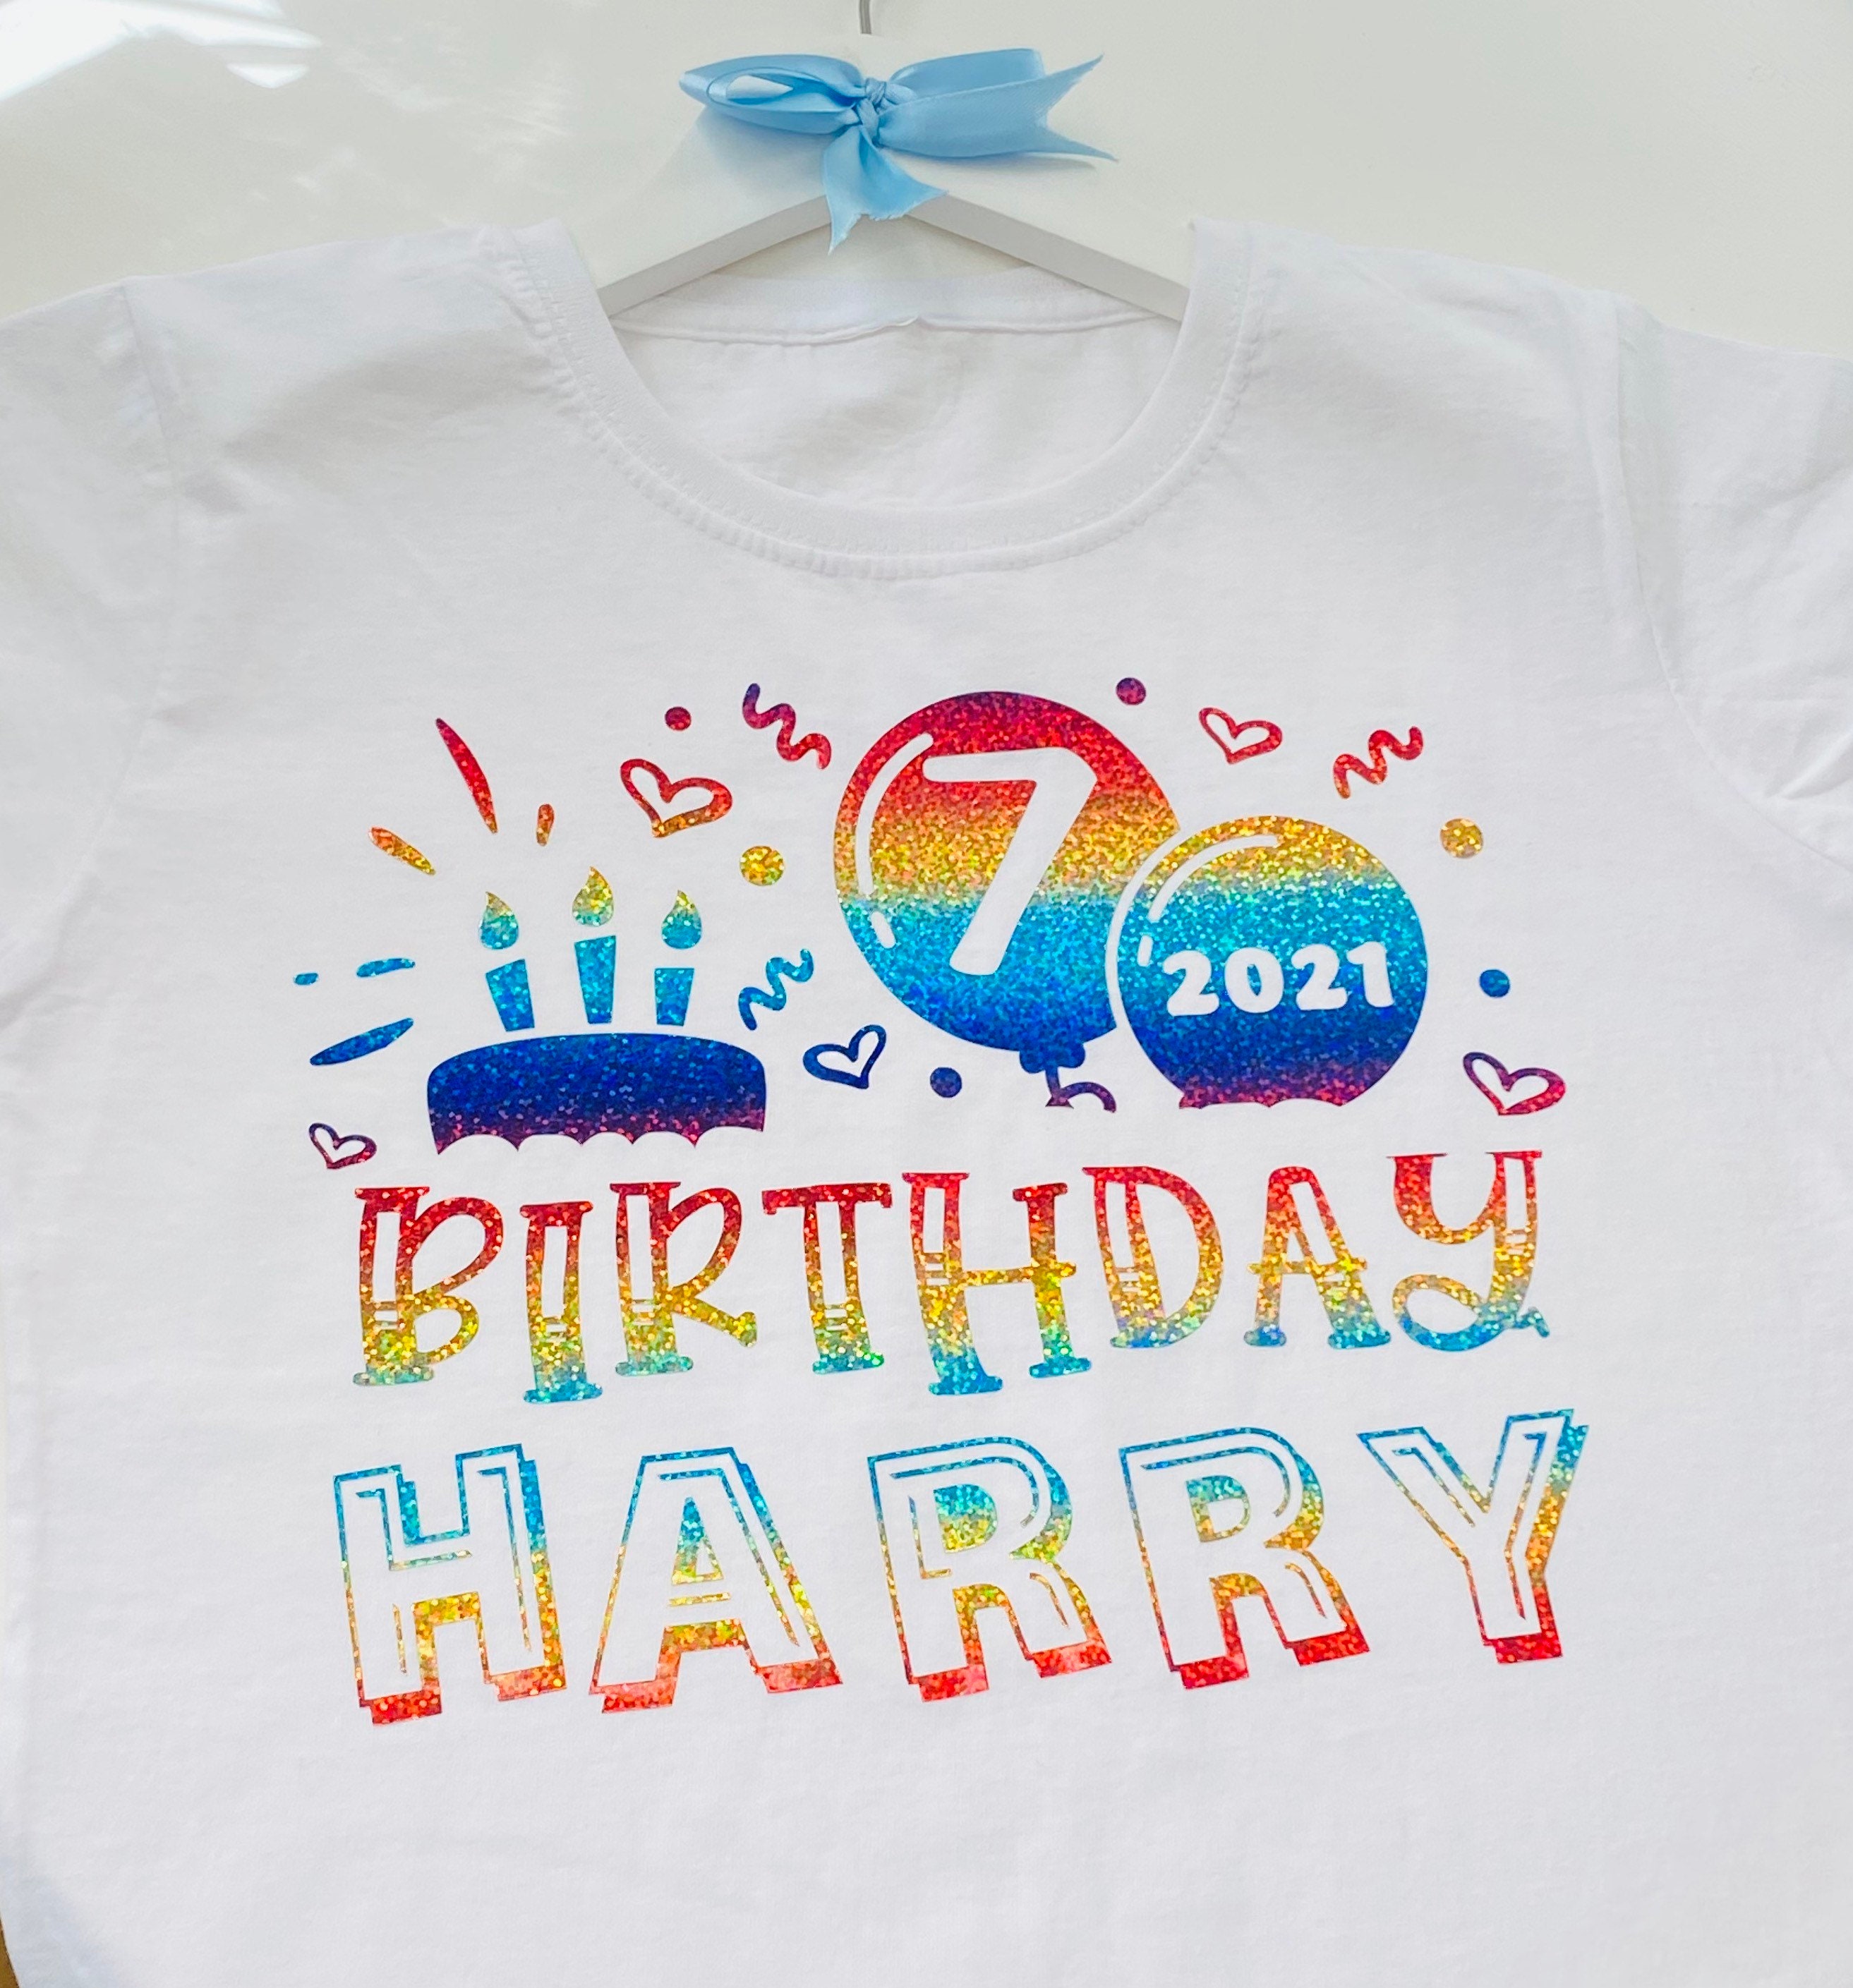 Kleding Meisjeskleding Tops & T-shirts T-shirts Pastel Color Rainbow Over the rainbow party birthday party rainbow theme Any Age 6th Rainbow birthday shirt for a girl Pink Rainbow 